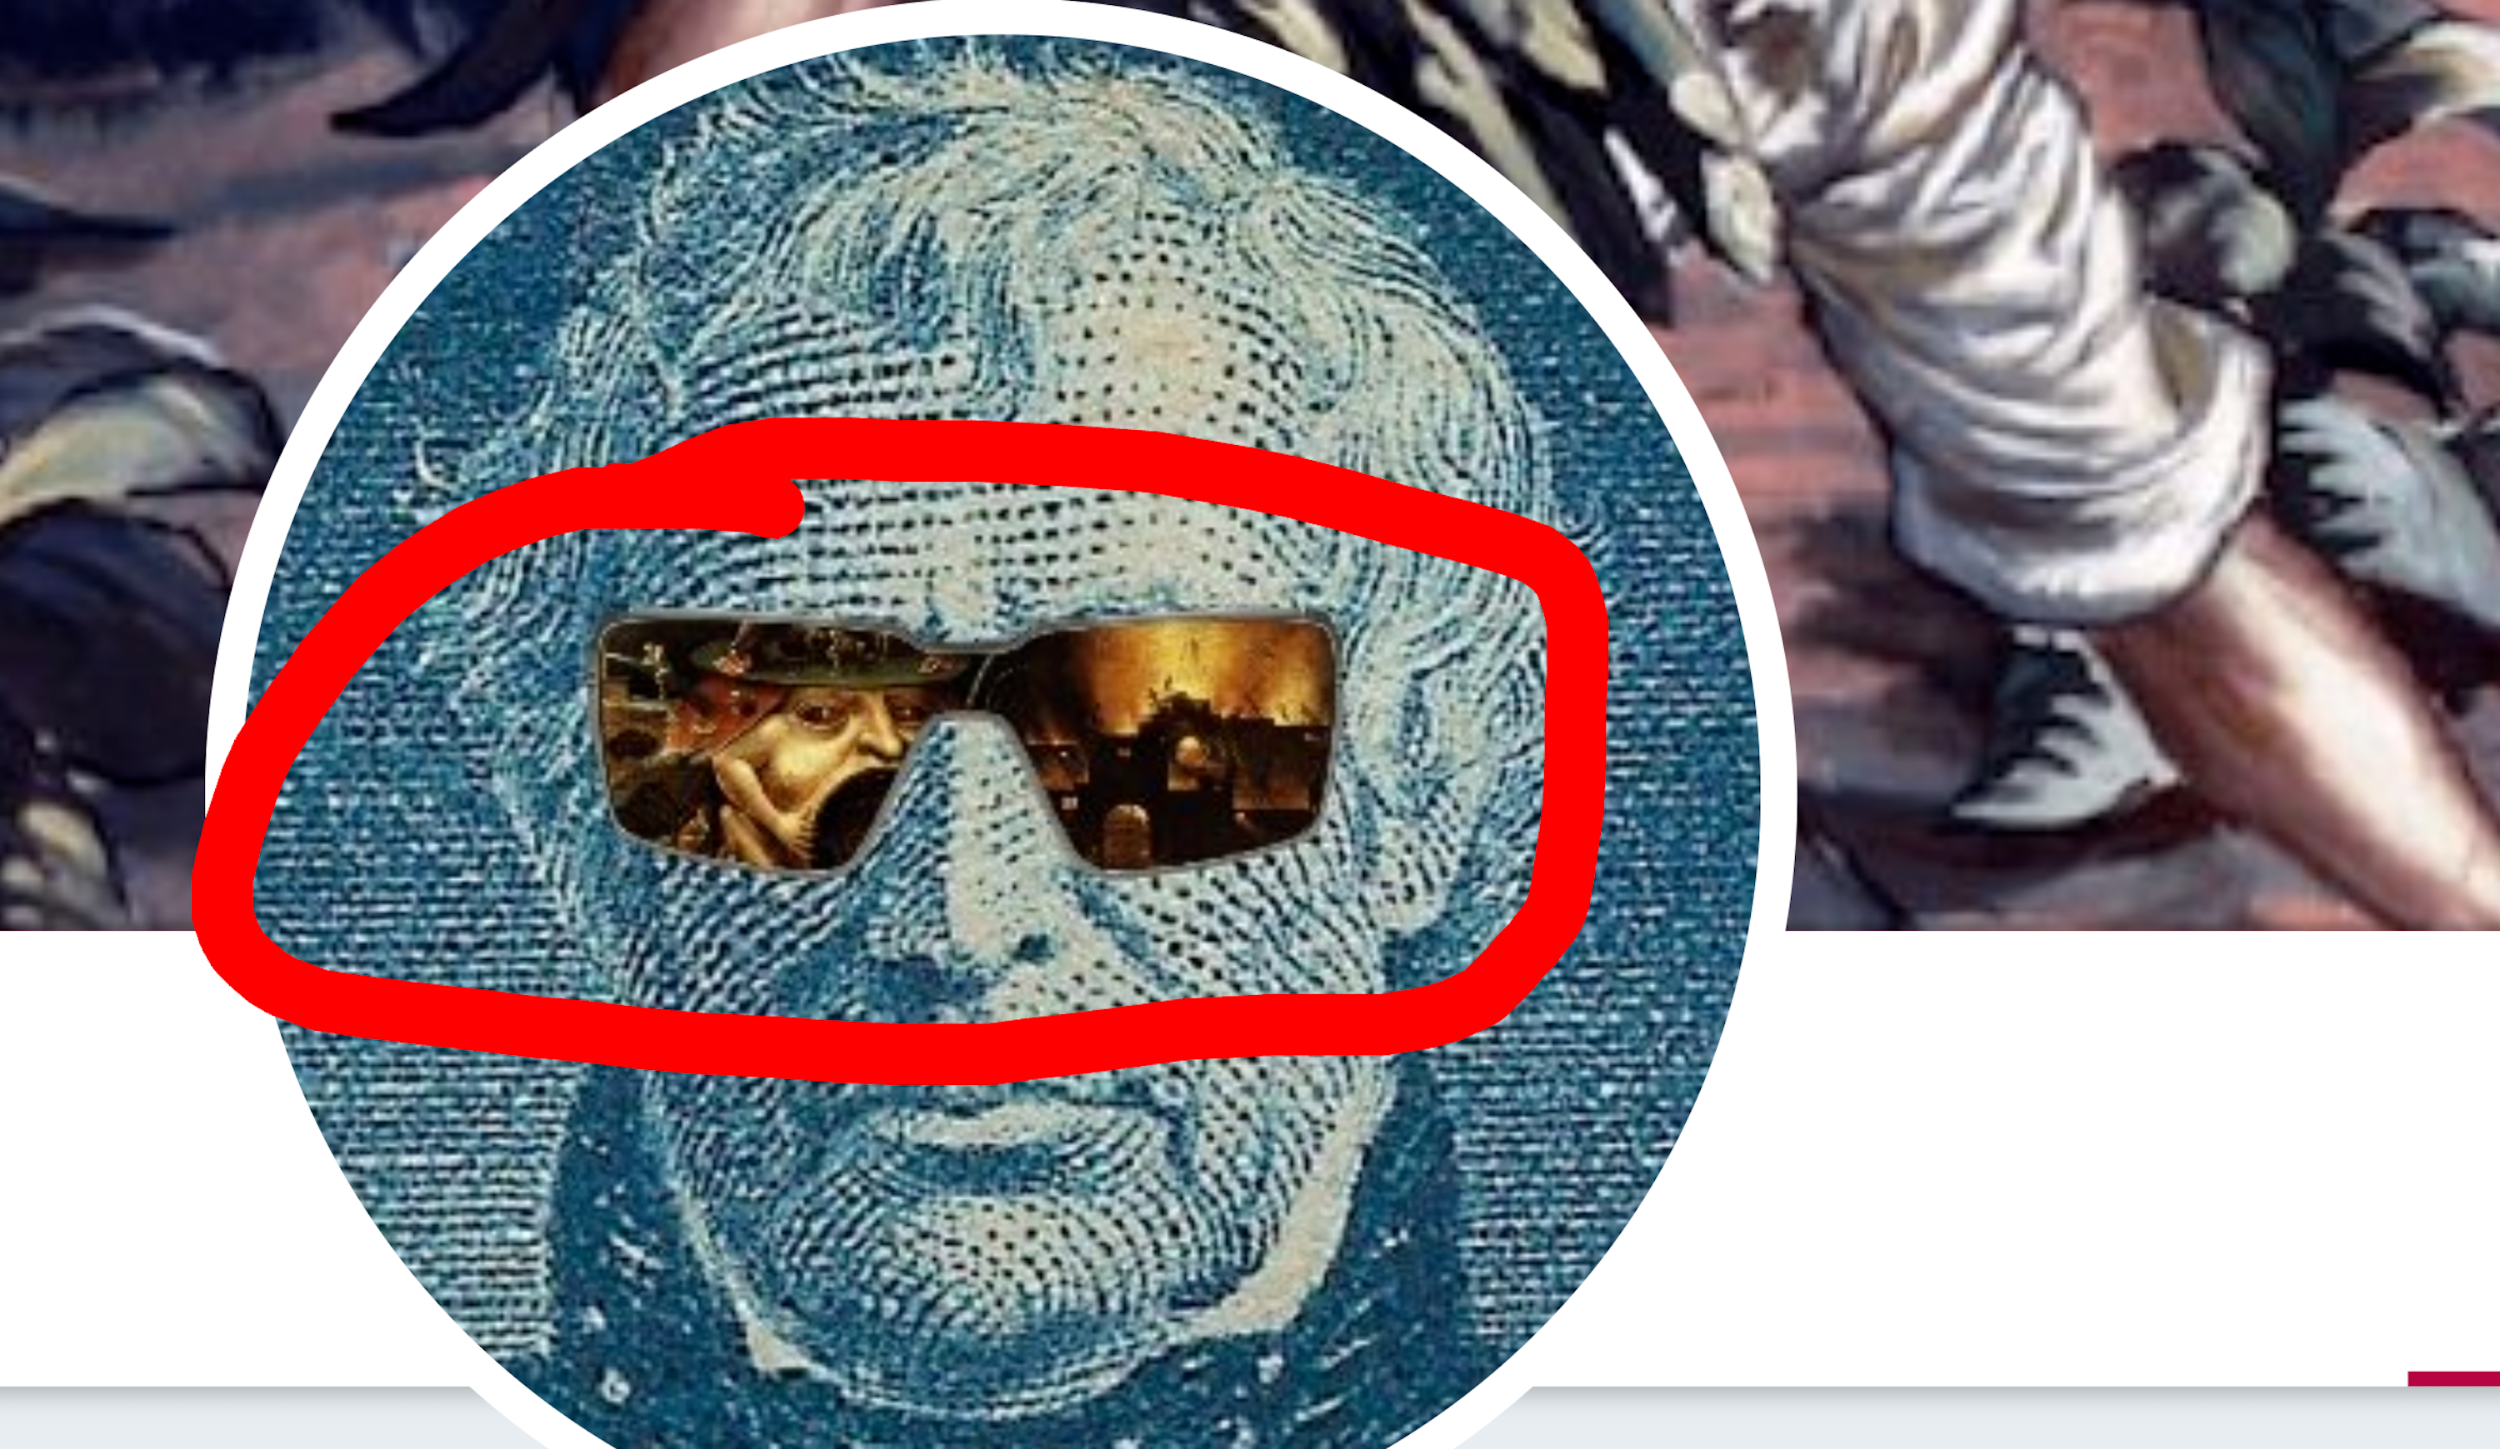 Closeup of est1608 pic - showing blue sketch of older man, and sunglasses reflecting vision of Hell.